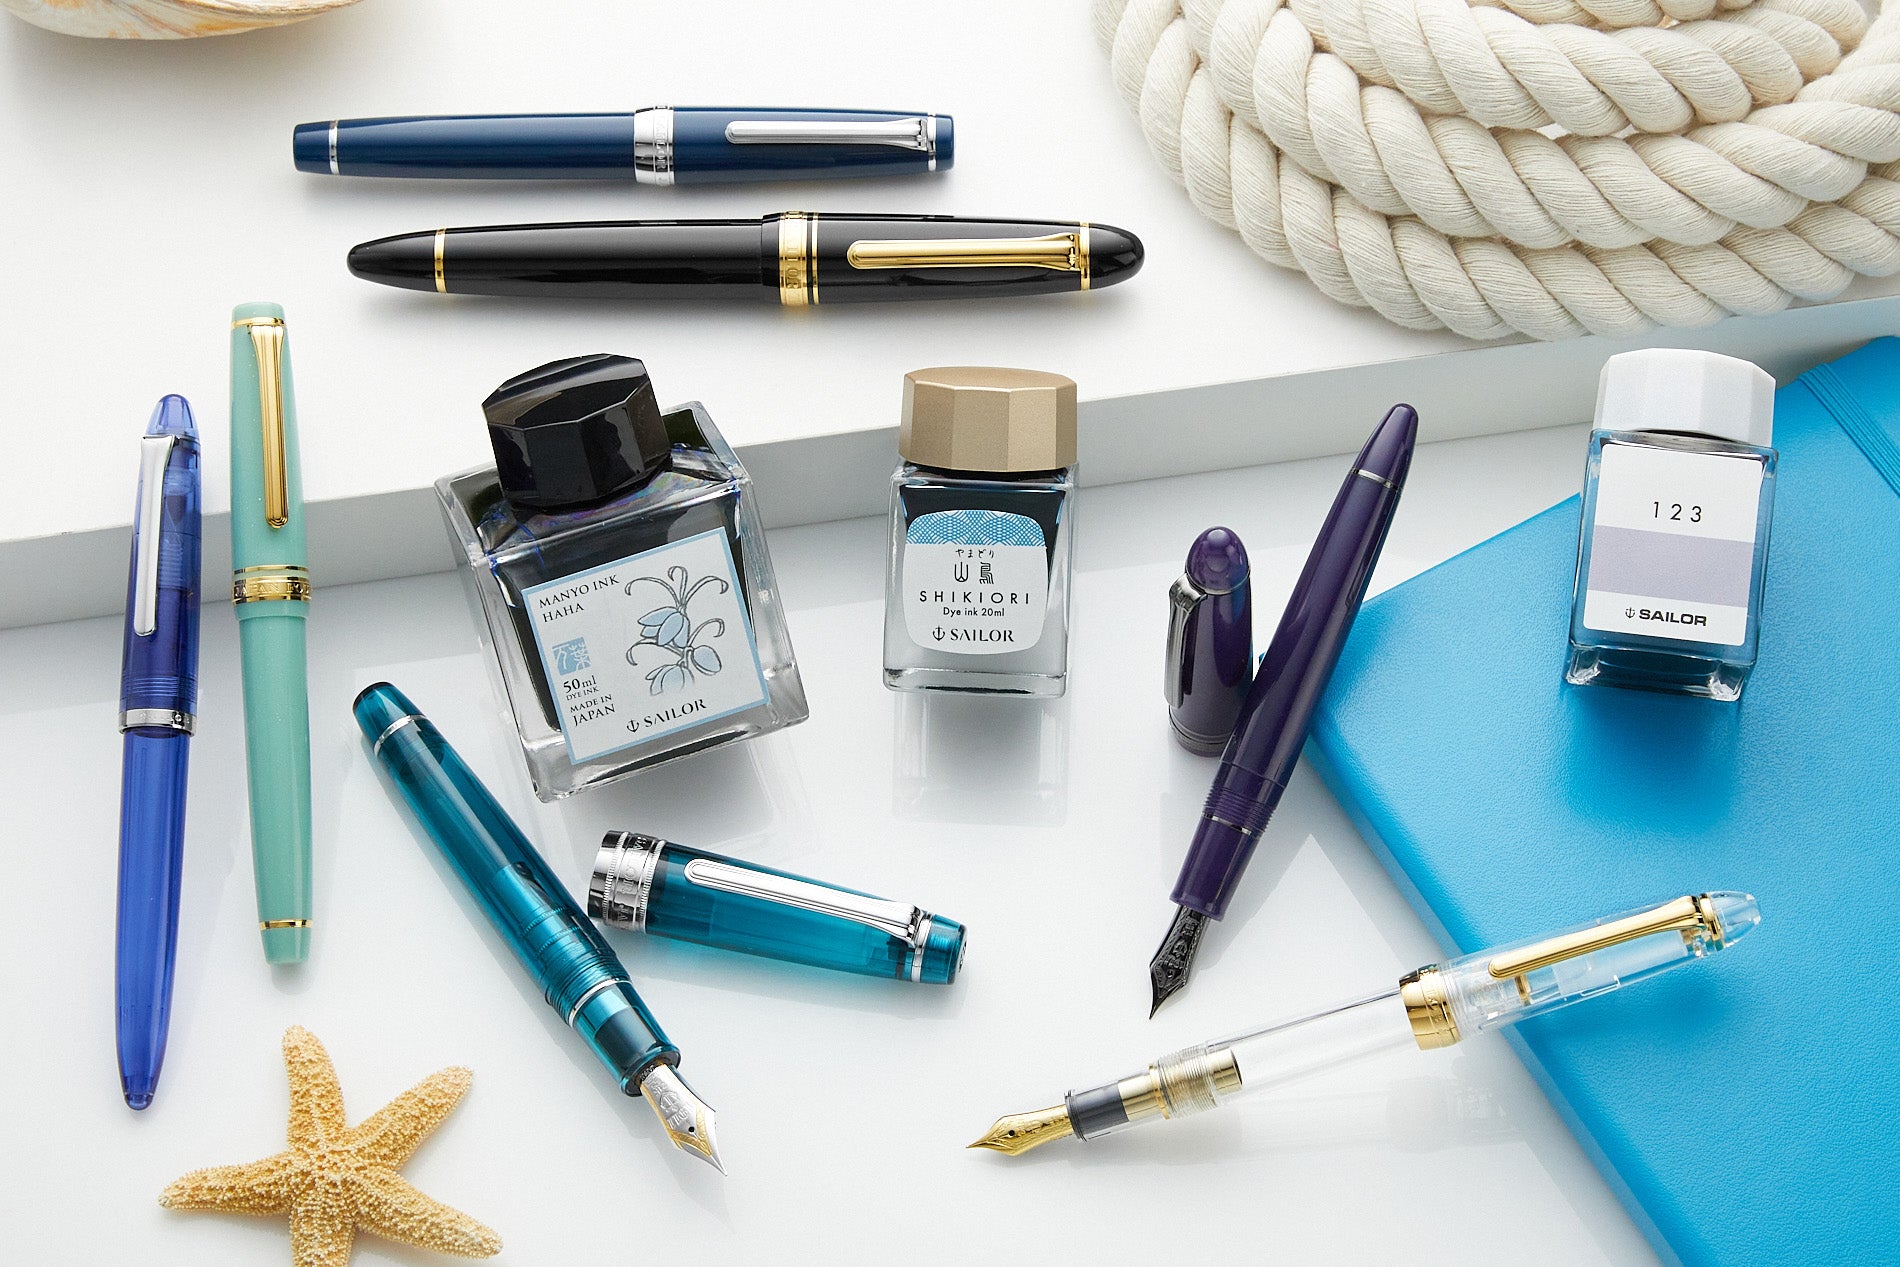 Sailor fountain pens and ink bottles